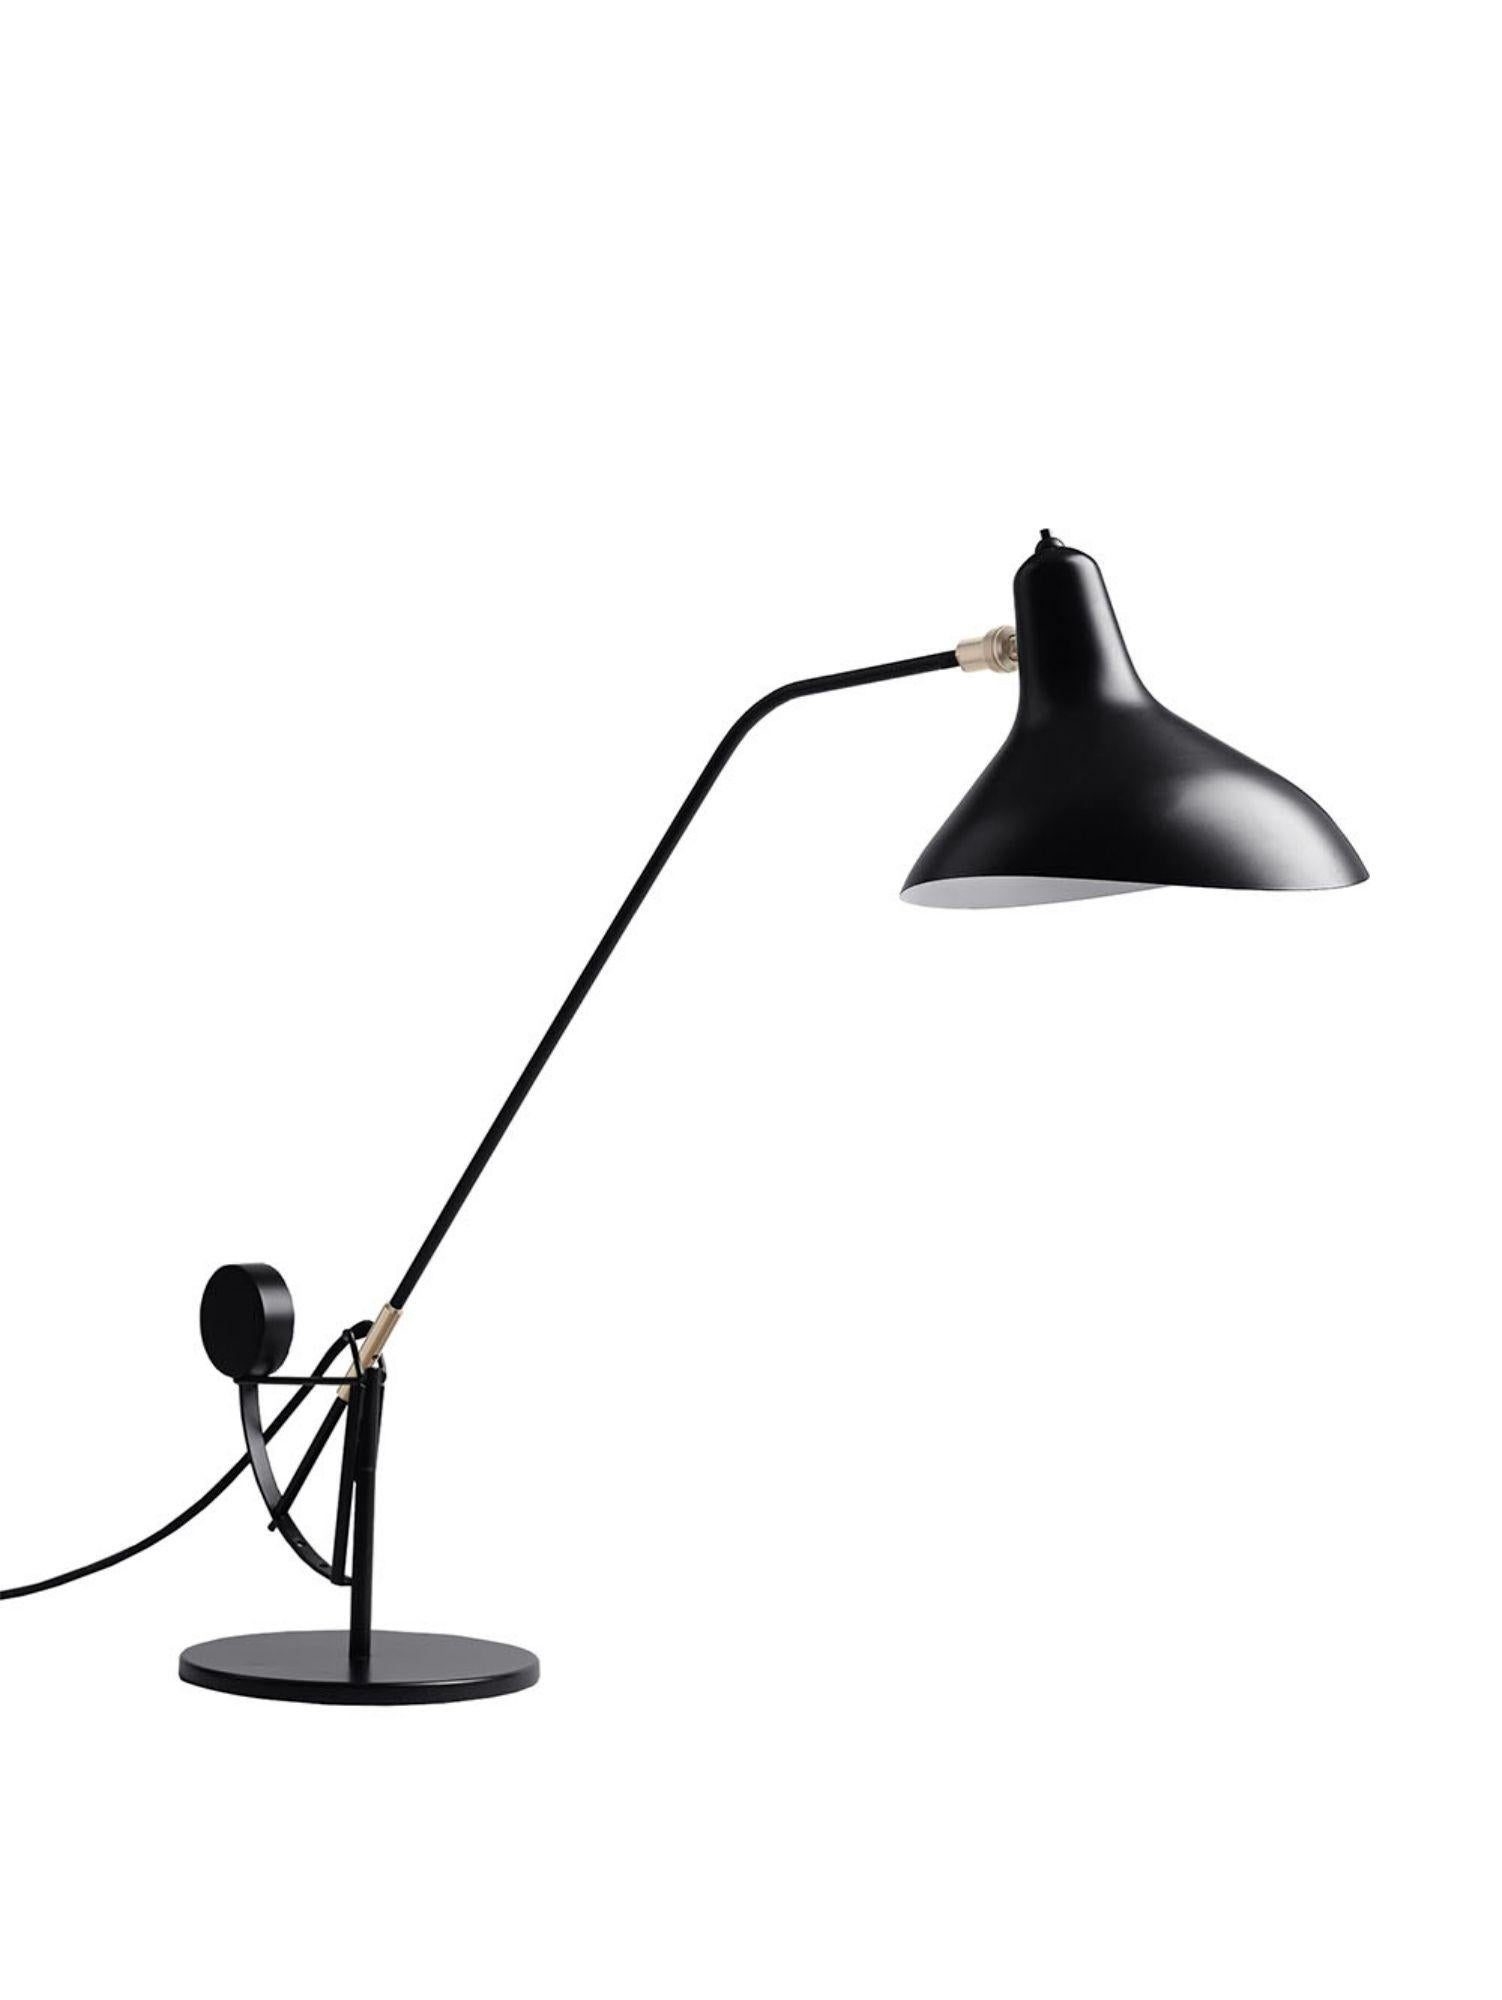 Contemporary DCW Editions Mantis BS3 Table Lamp in Black Steel and Aluminum For Sale